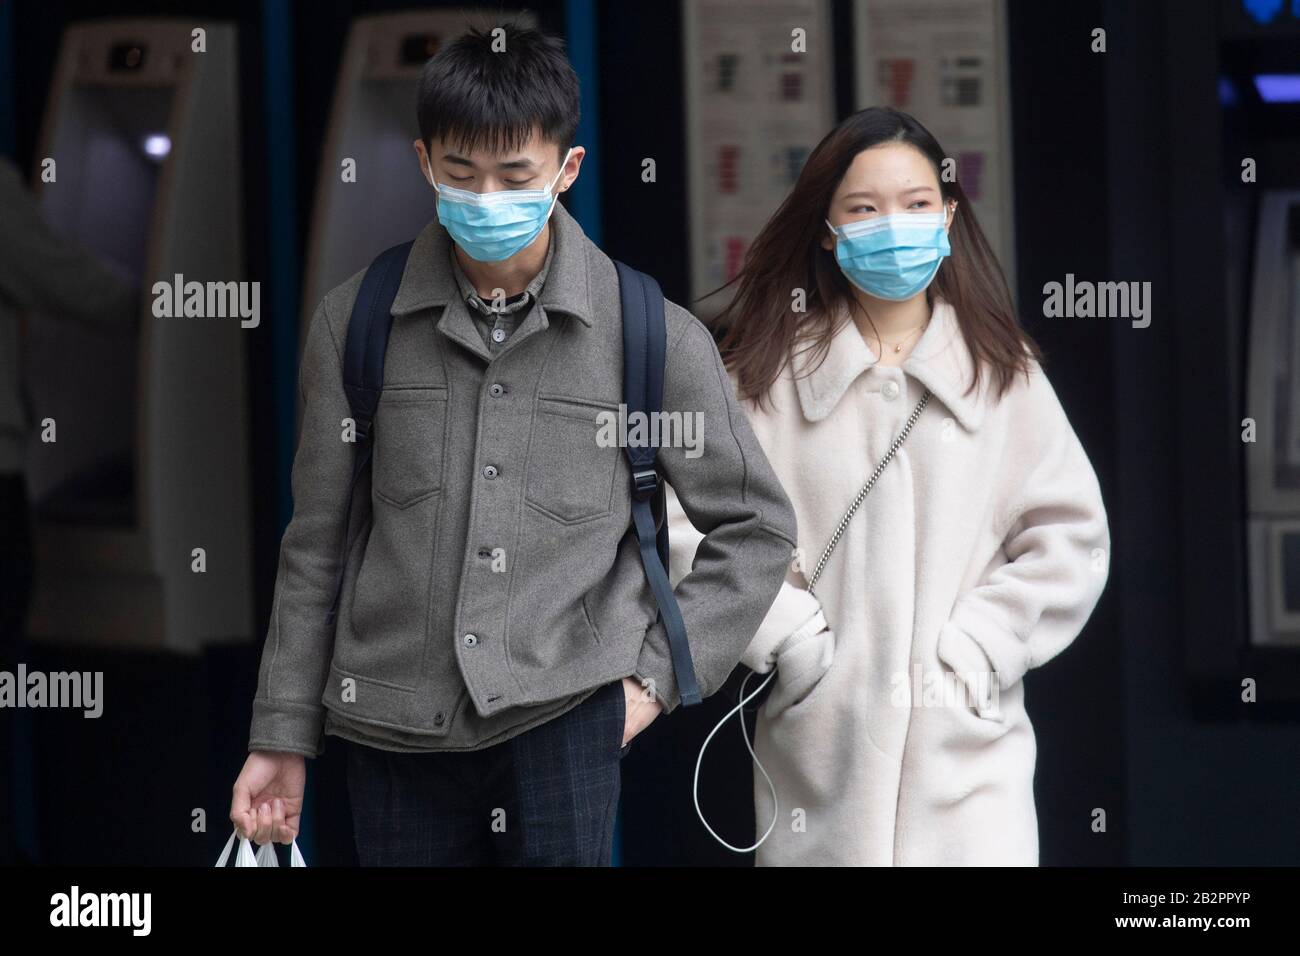 London, Britain. 3rd Mar, 2020. A man and a woman wearing face masks walk past a store in central London, Britain, on March 3, 2020. British Prime Minister Boris Johnson on Tuesday set out the government's action plan to tackle the spread of the novel coronavirus, as the number of infections reached 51 across the country. Credit: Ray Tang/Xinhua/Alamy Live News Stock Photo